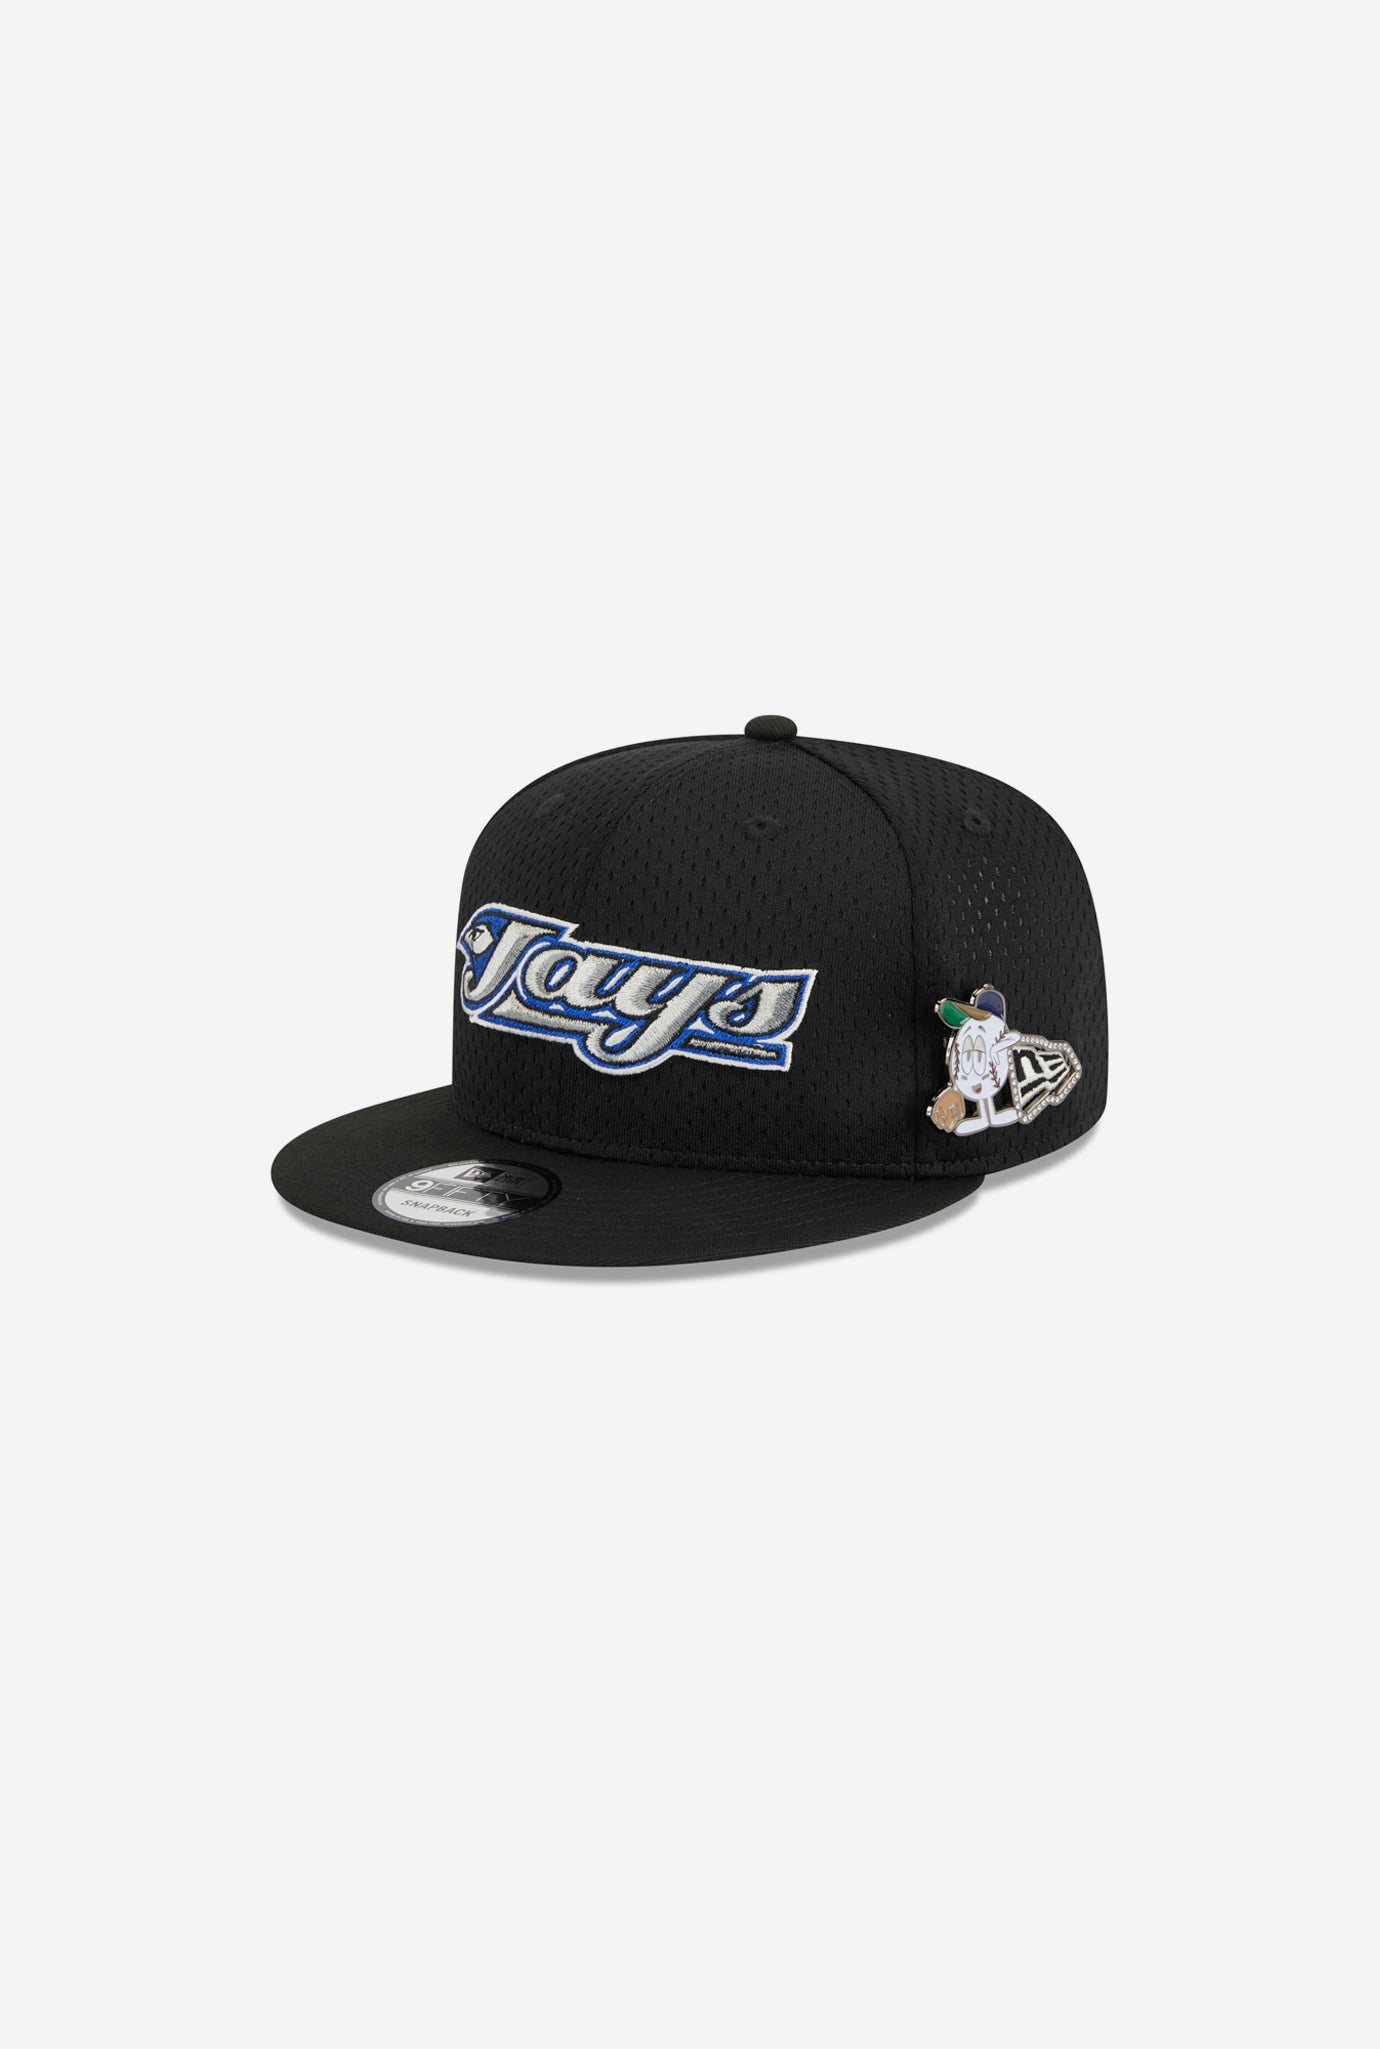 Toronto Blue Jays Post-Up Pin 9FORTY